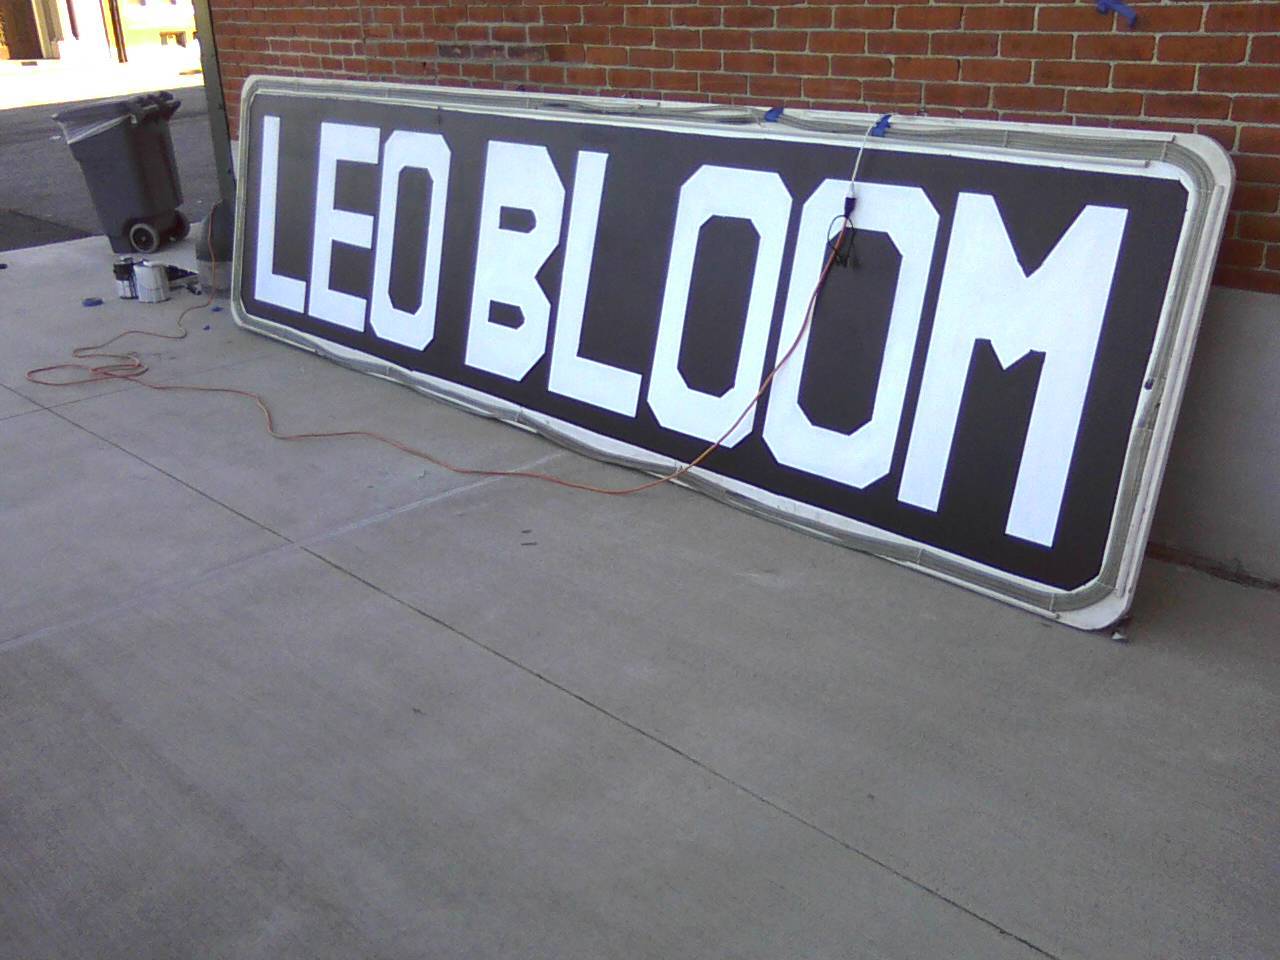 Leo Blooms name up in lights. 1